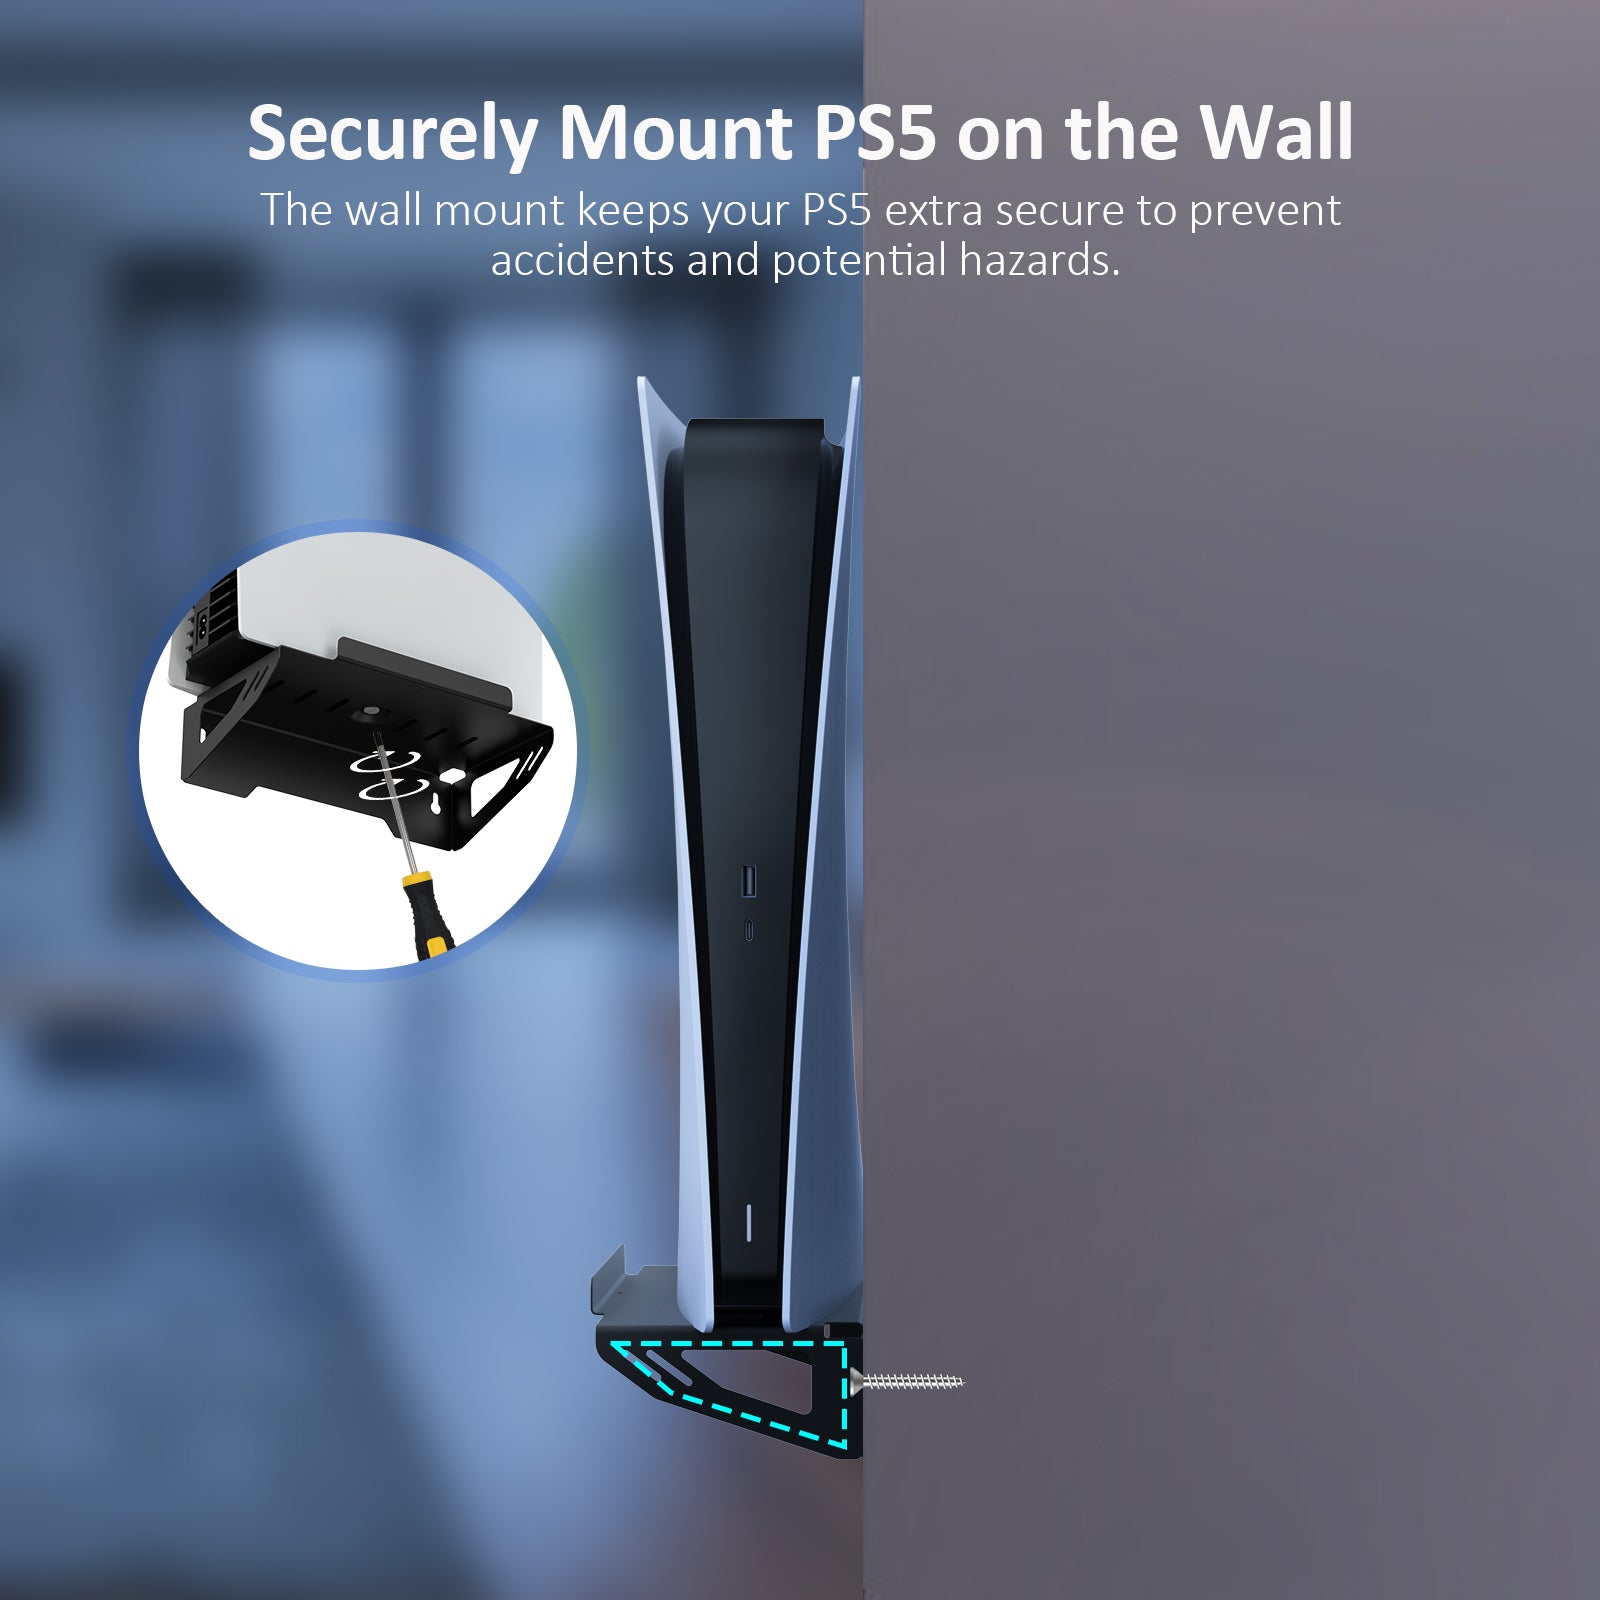 Securely mount your PS5 console to the Steel Wall Stand for stable and safe installation